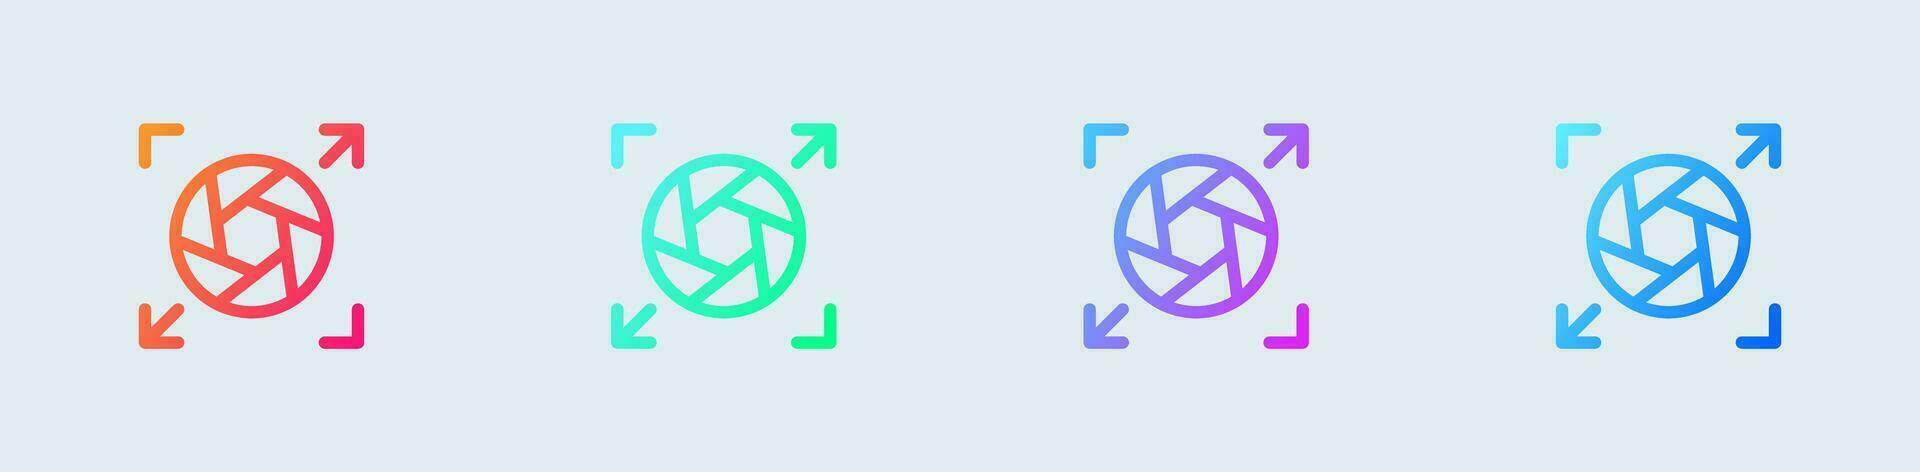 Wide lens line icon in gradient colors. Optical signs vector illustration.